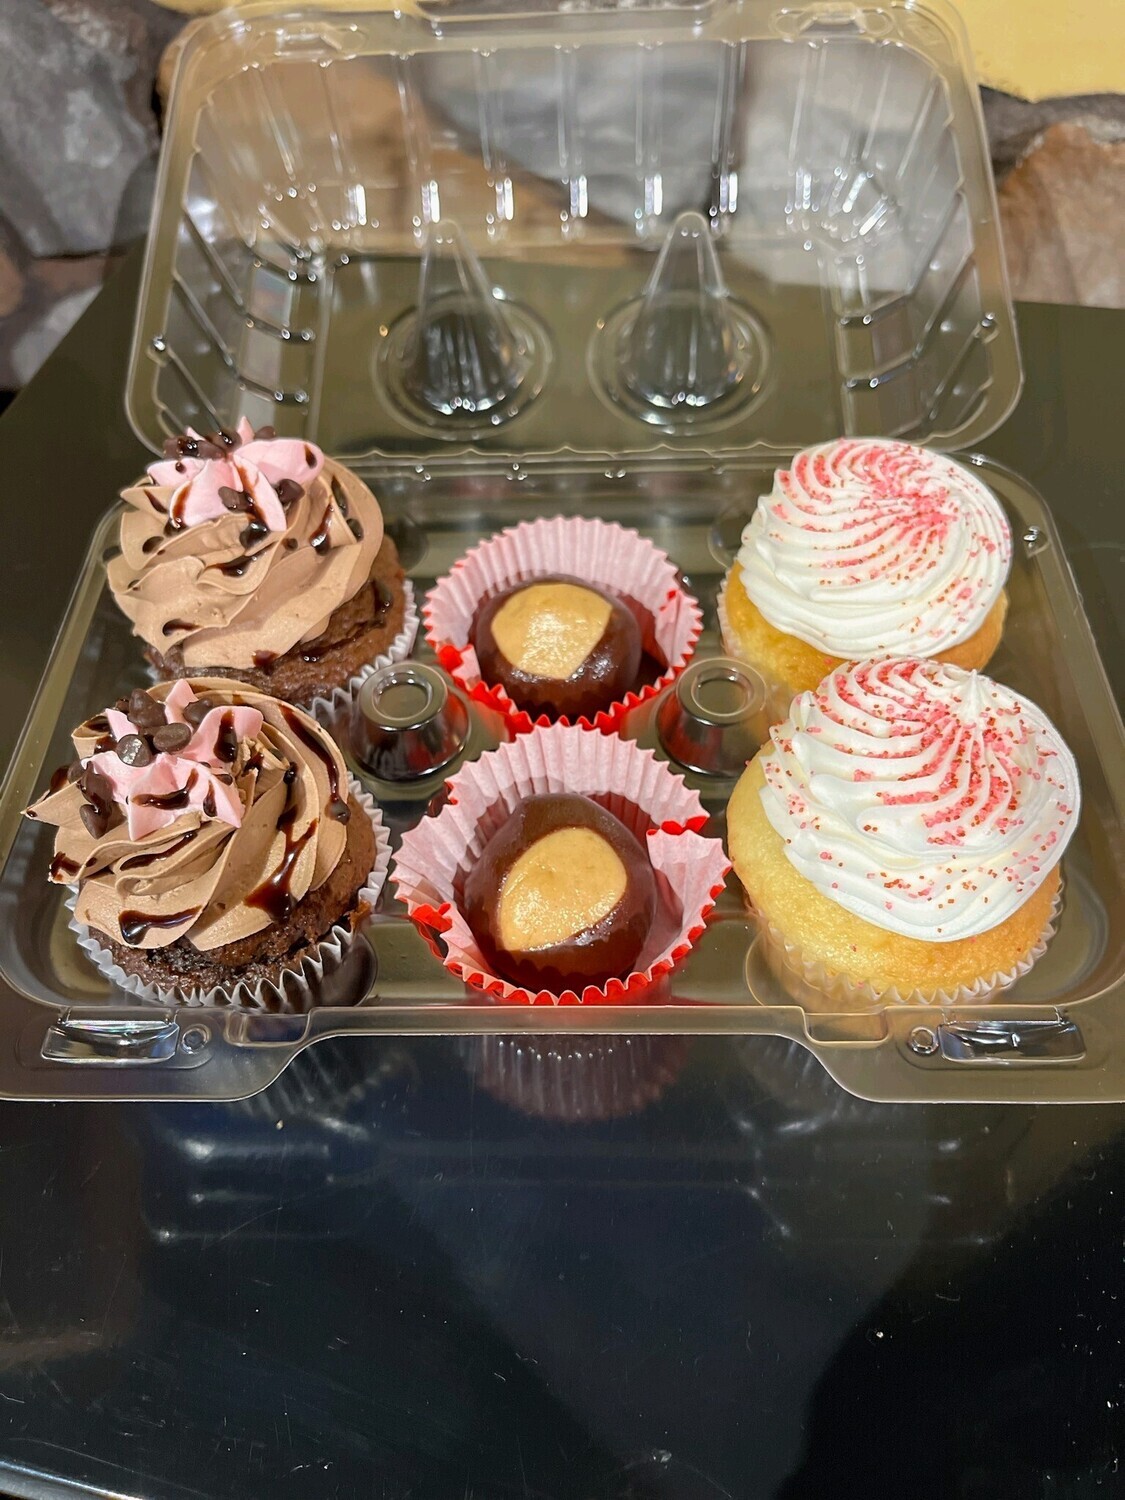 VALENTINE'S DAY 6 COUNT - LOVEY DOVEY PACK - In-Store Pickup - 
2 Wedding Bells & 2 Chocoholic Cupcakes + 2 Hand-Dipped Buckeyes